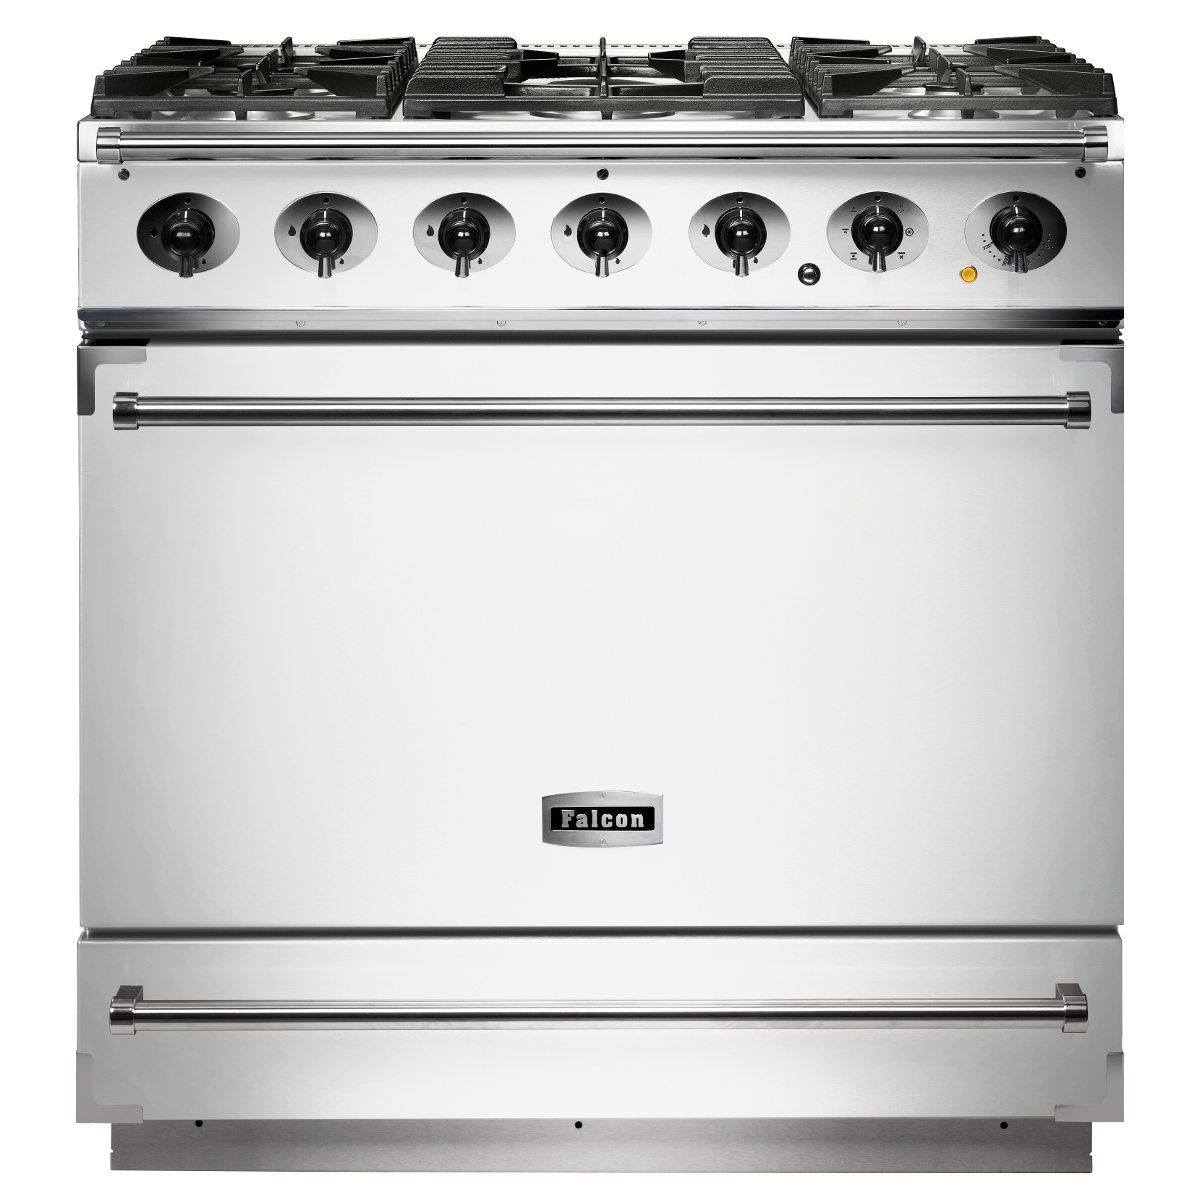 Falcon F900SDFWH/N 90cm Single Cavity Dual Fuel Range Cooker in White